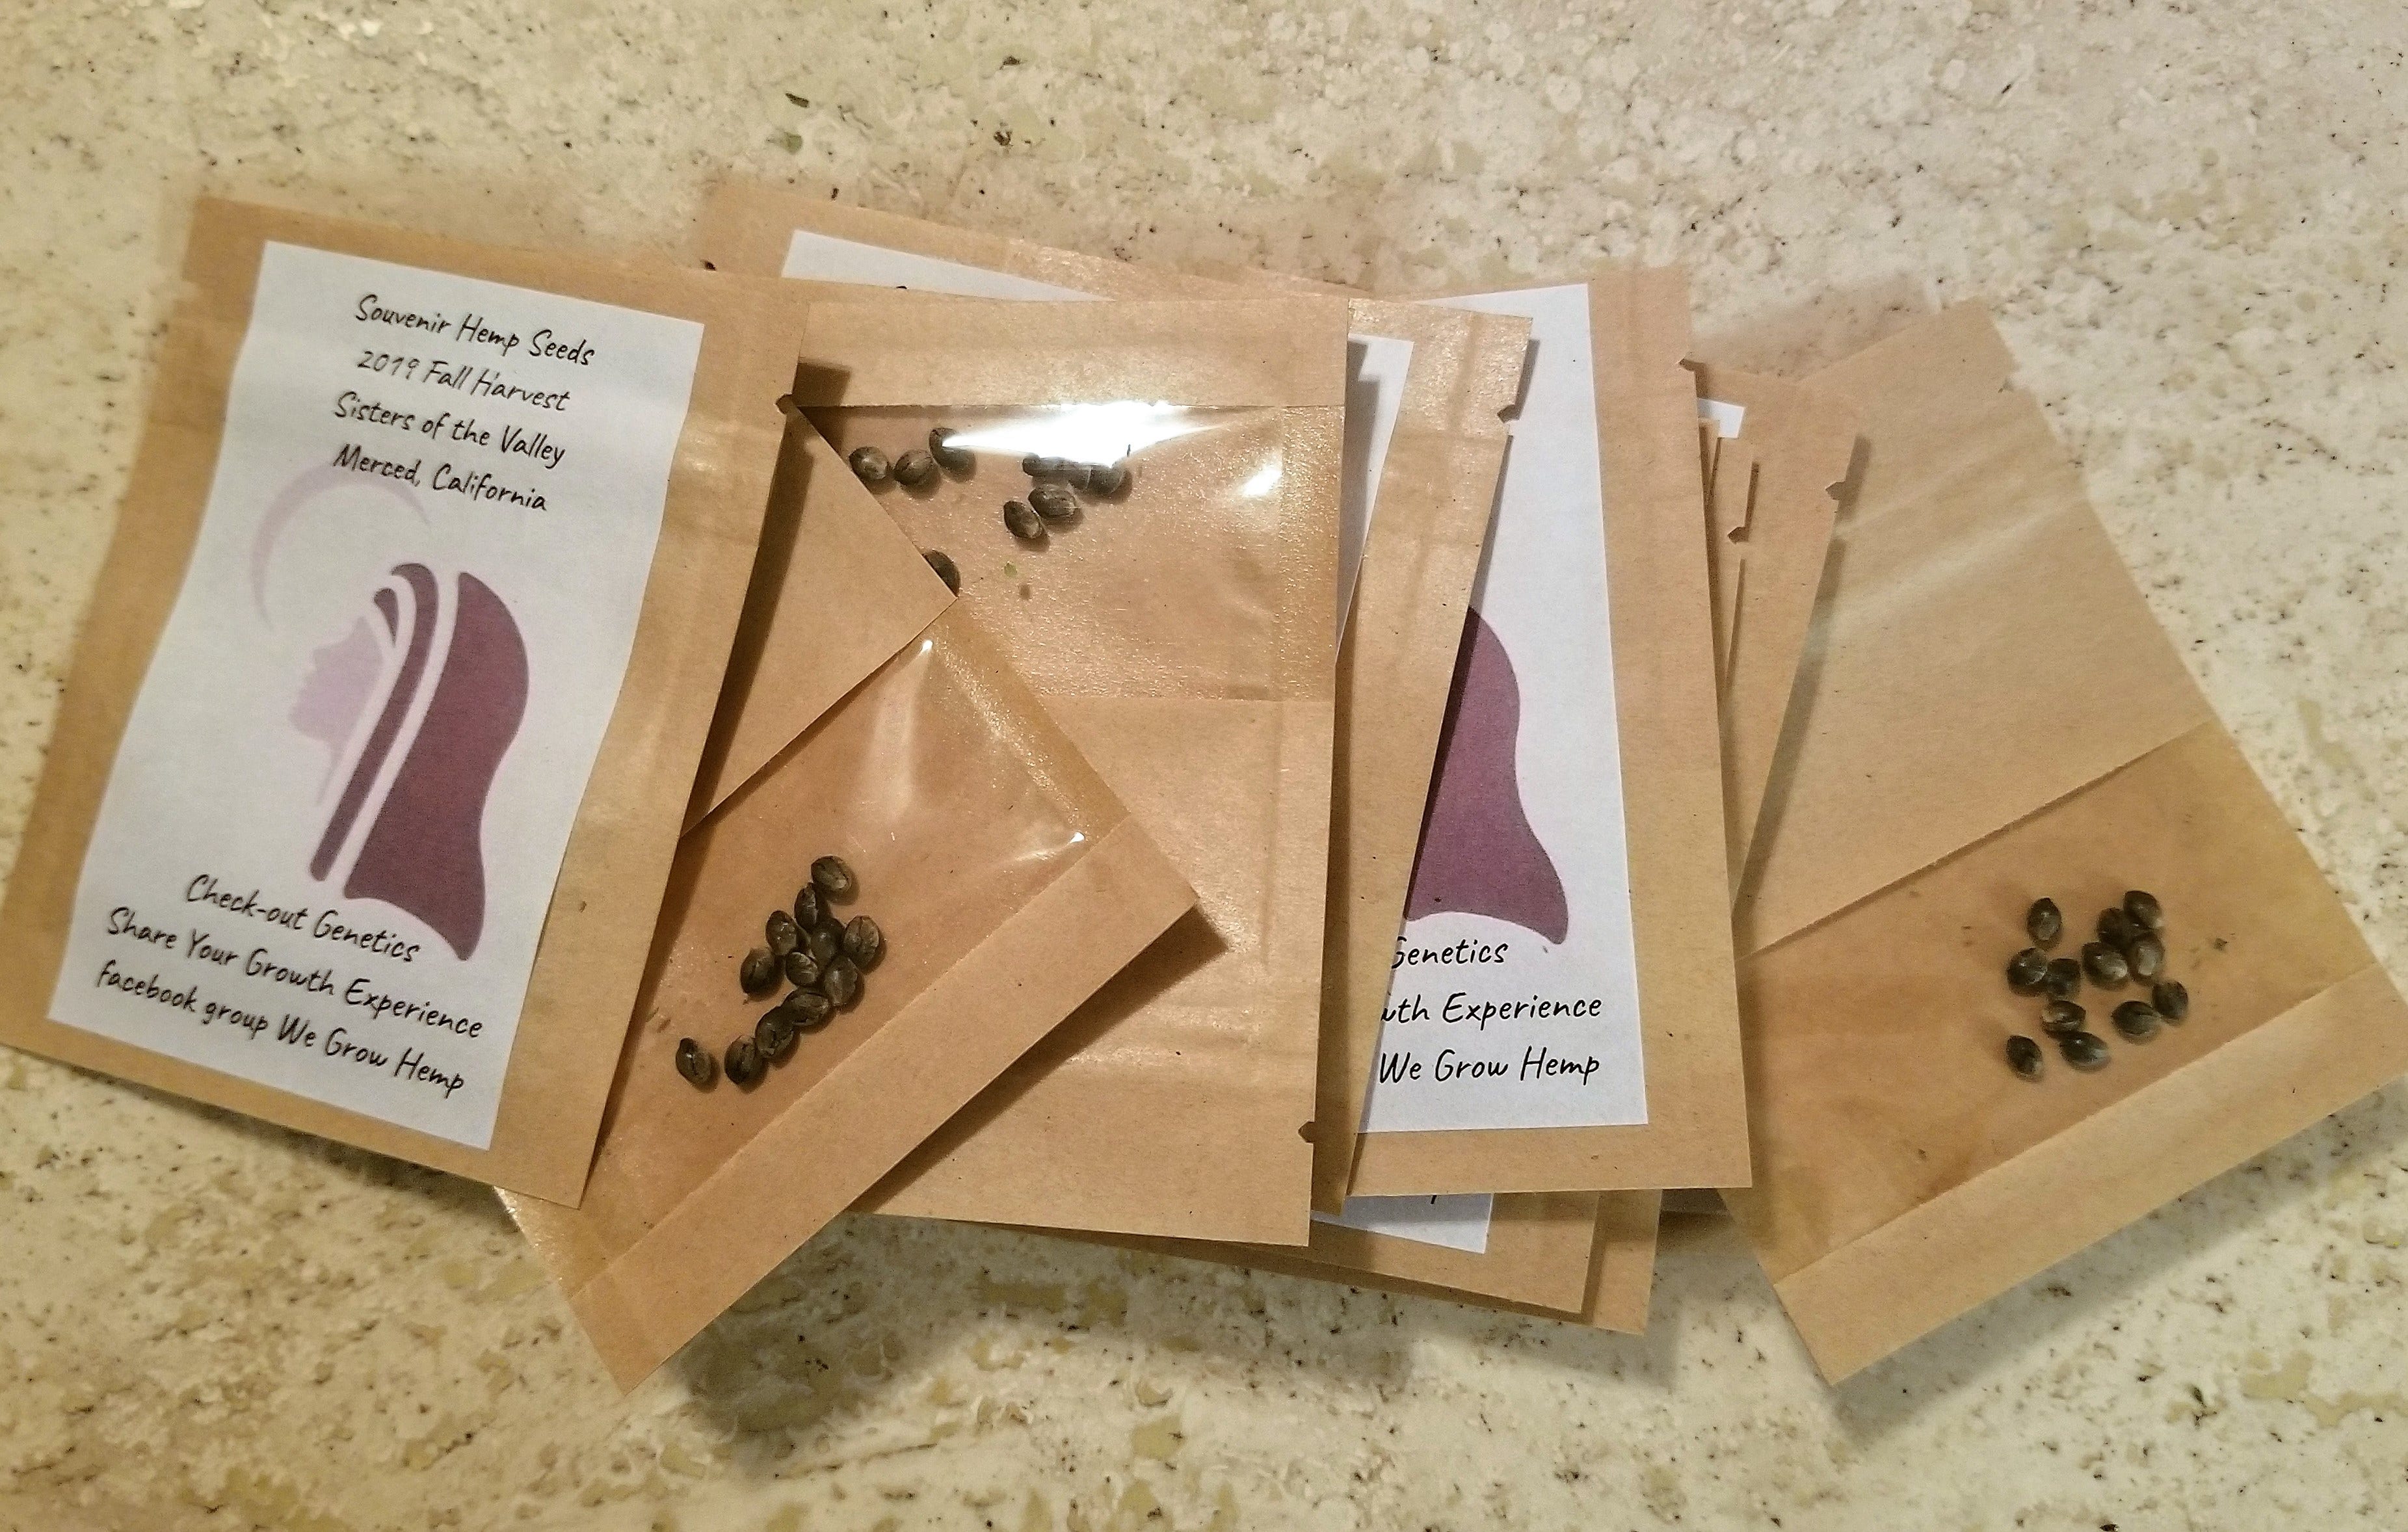 Sisters Of The Valley Set To Mail 1,000 Free Hemp Seed Packets In February And March